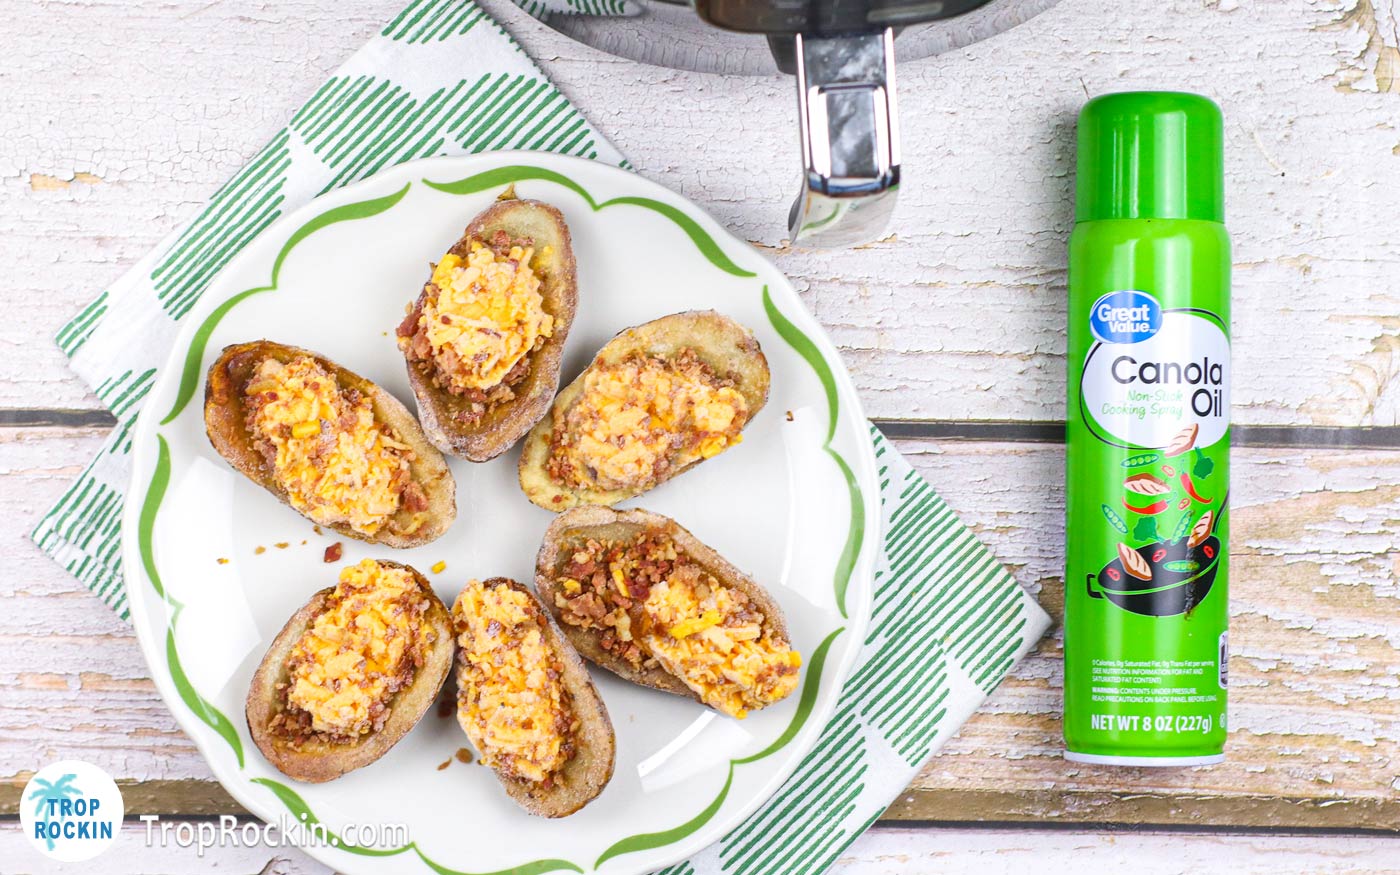 Six frozen potato skins on a plate and a can of canoloa non-stick cooking spray.